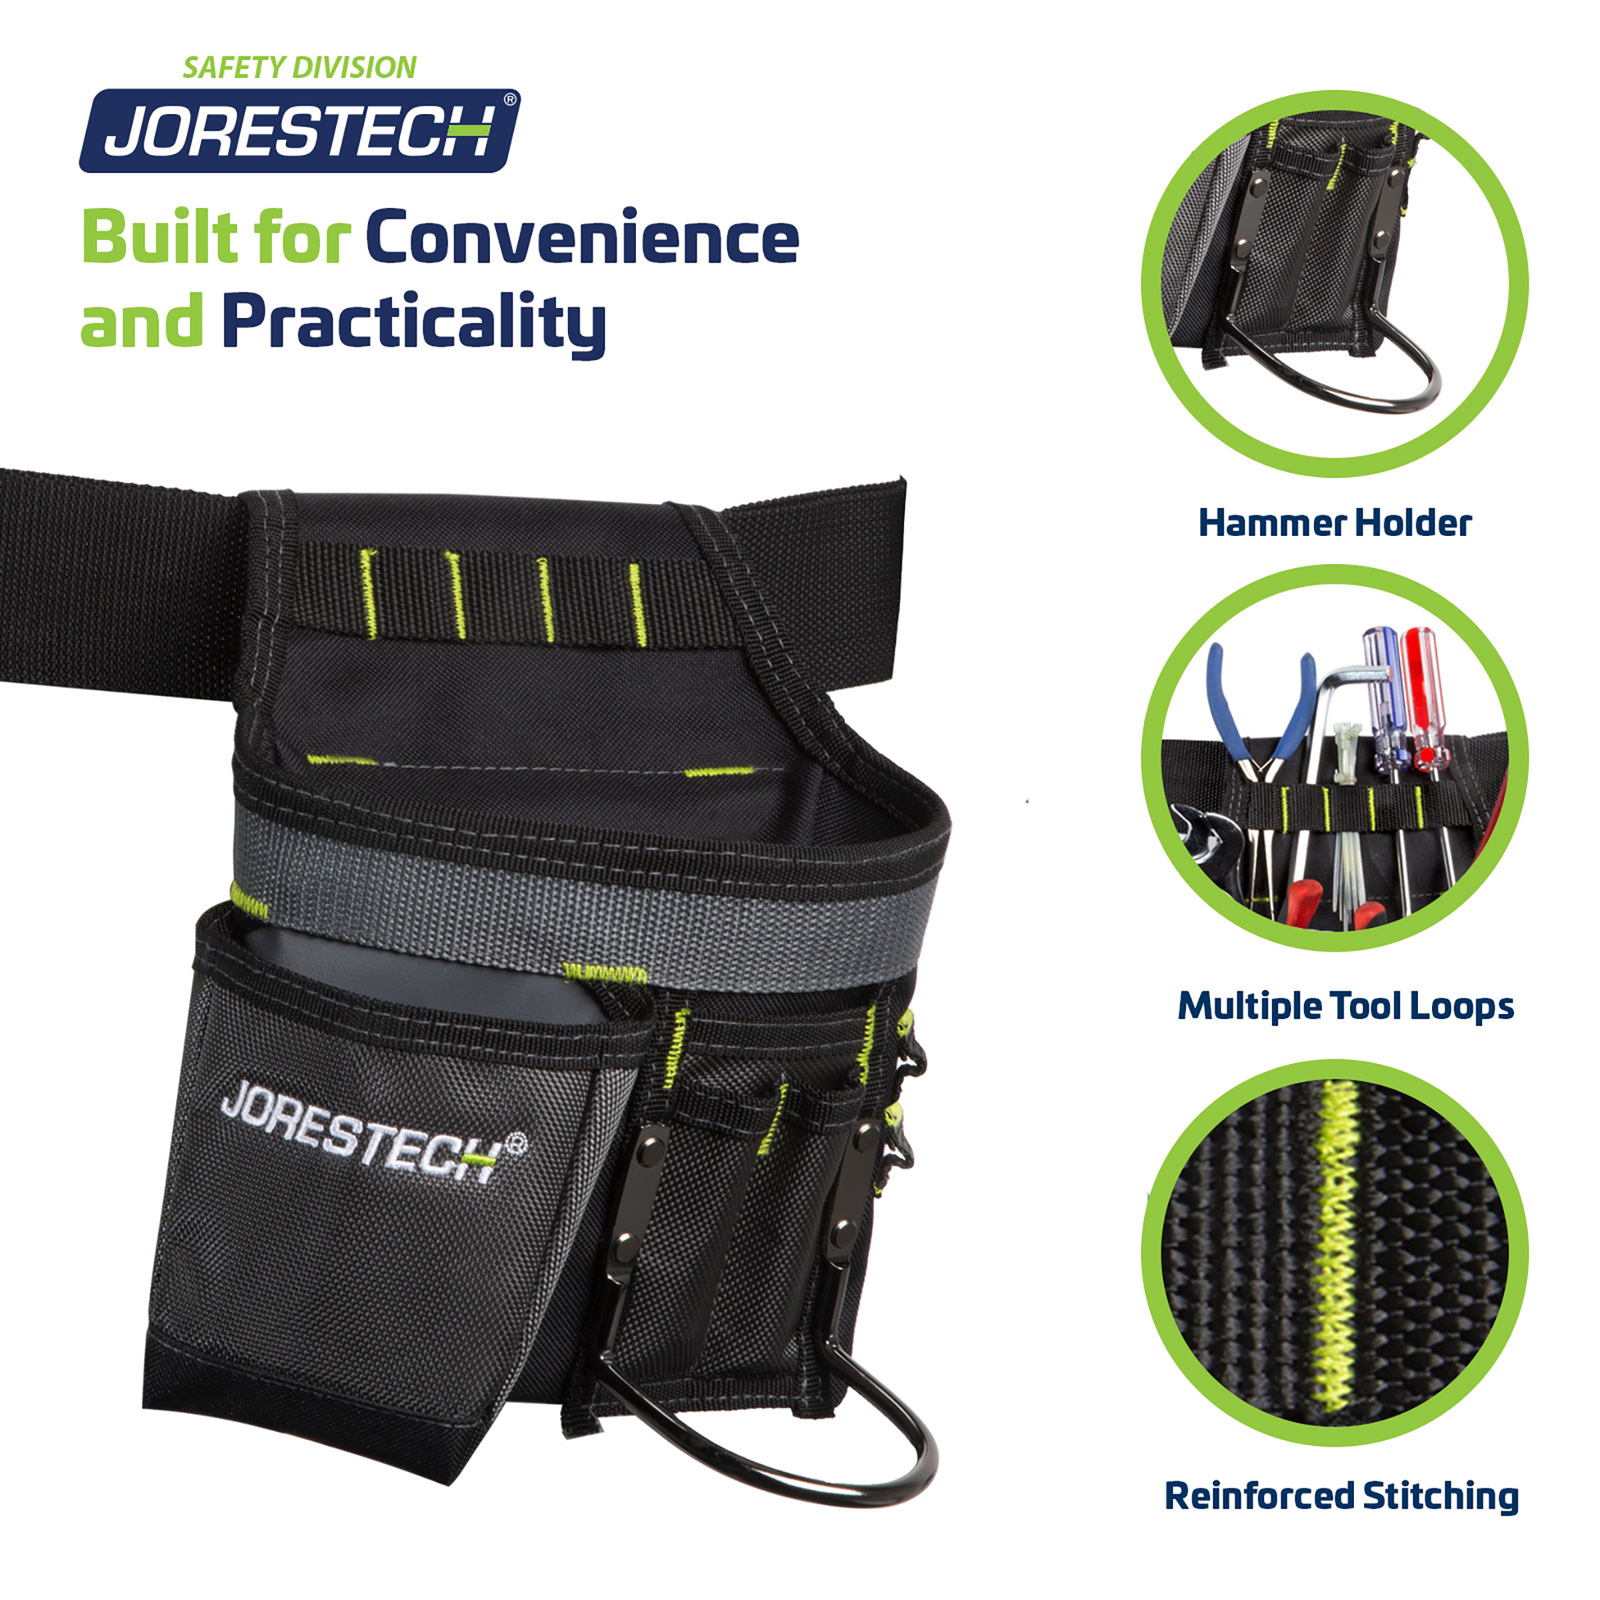 Left side of the banner shows the 5 Pocket Tool Belt Pouch with Hammer Holder. On the right side there are 3 closeups that show: the hammer holder, multiple tool loops and the reinforced lime color stitching. A title reads: Built for convenience and practicality.